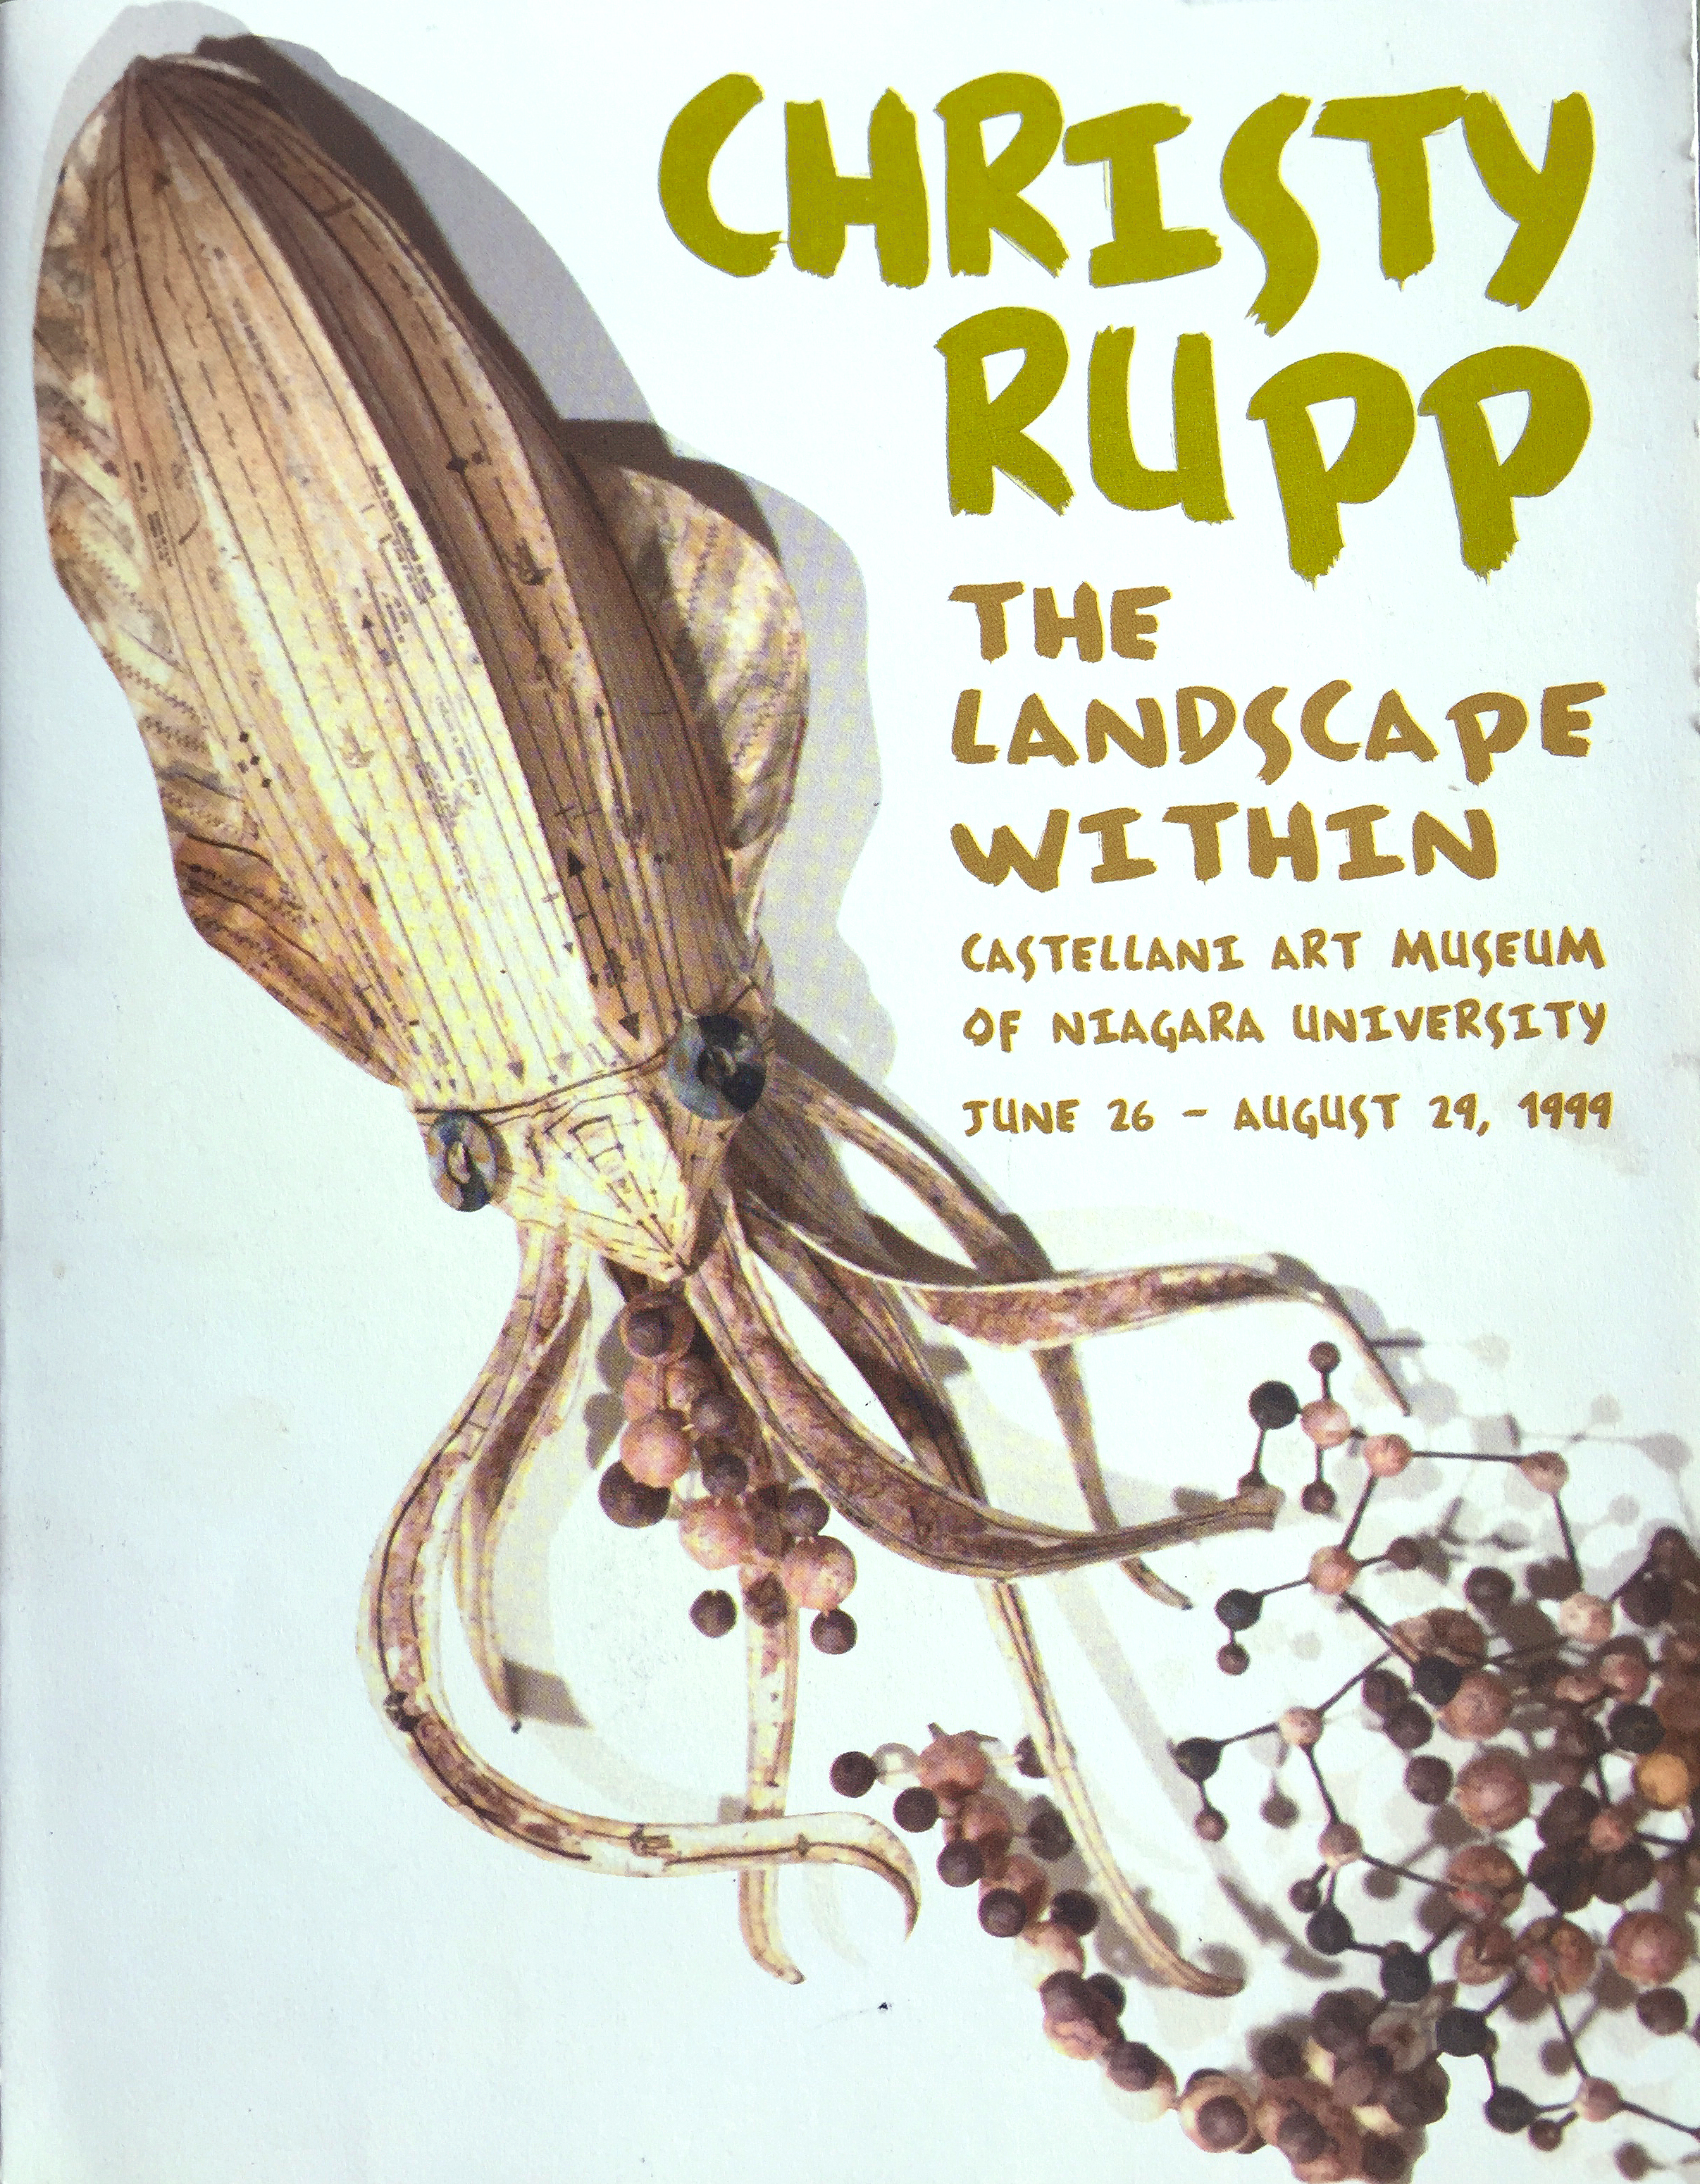 Cover of exhibit catalog for The Landscape Within showing large squid sculpture